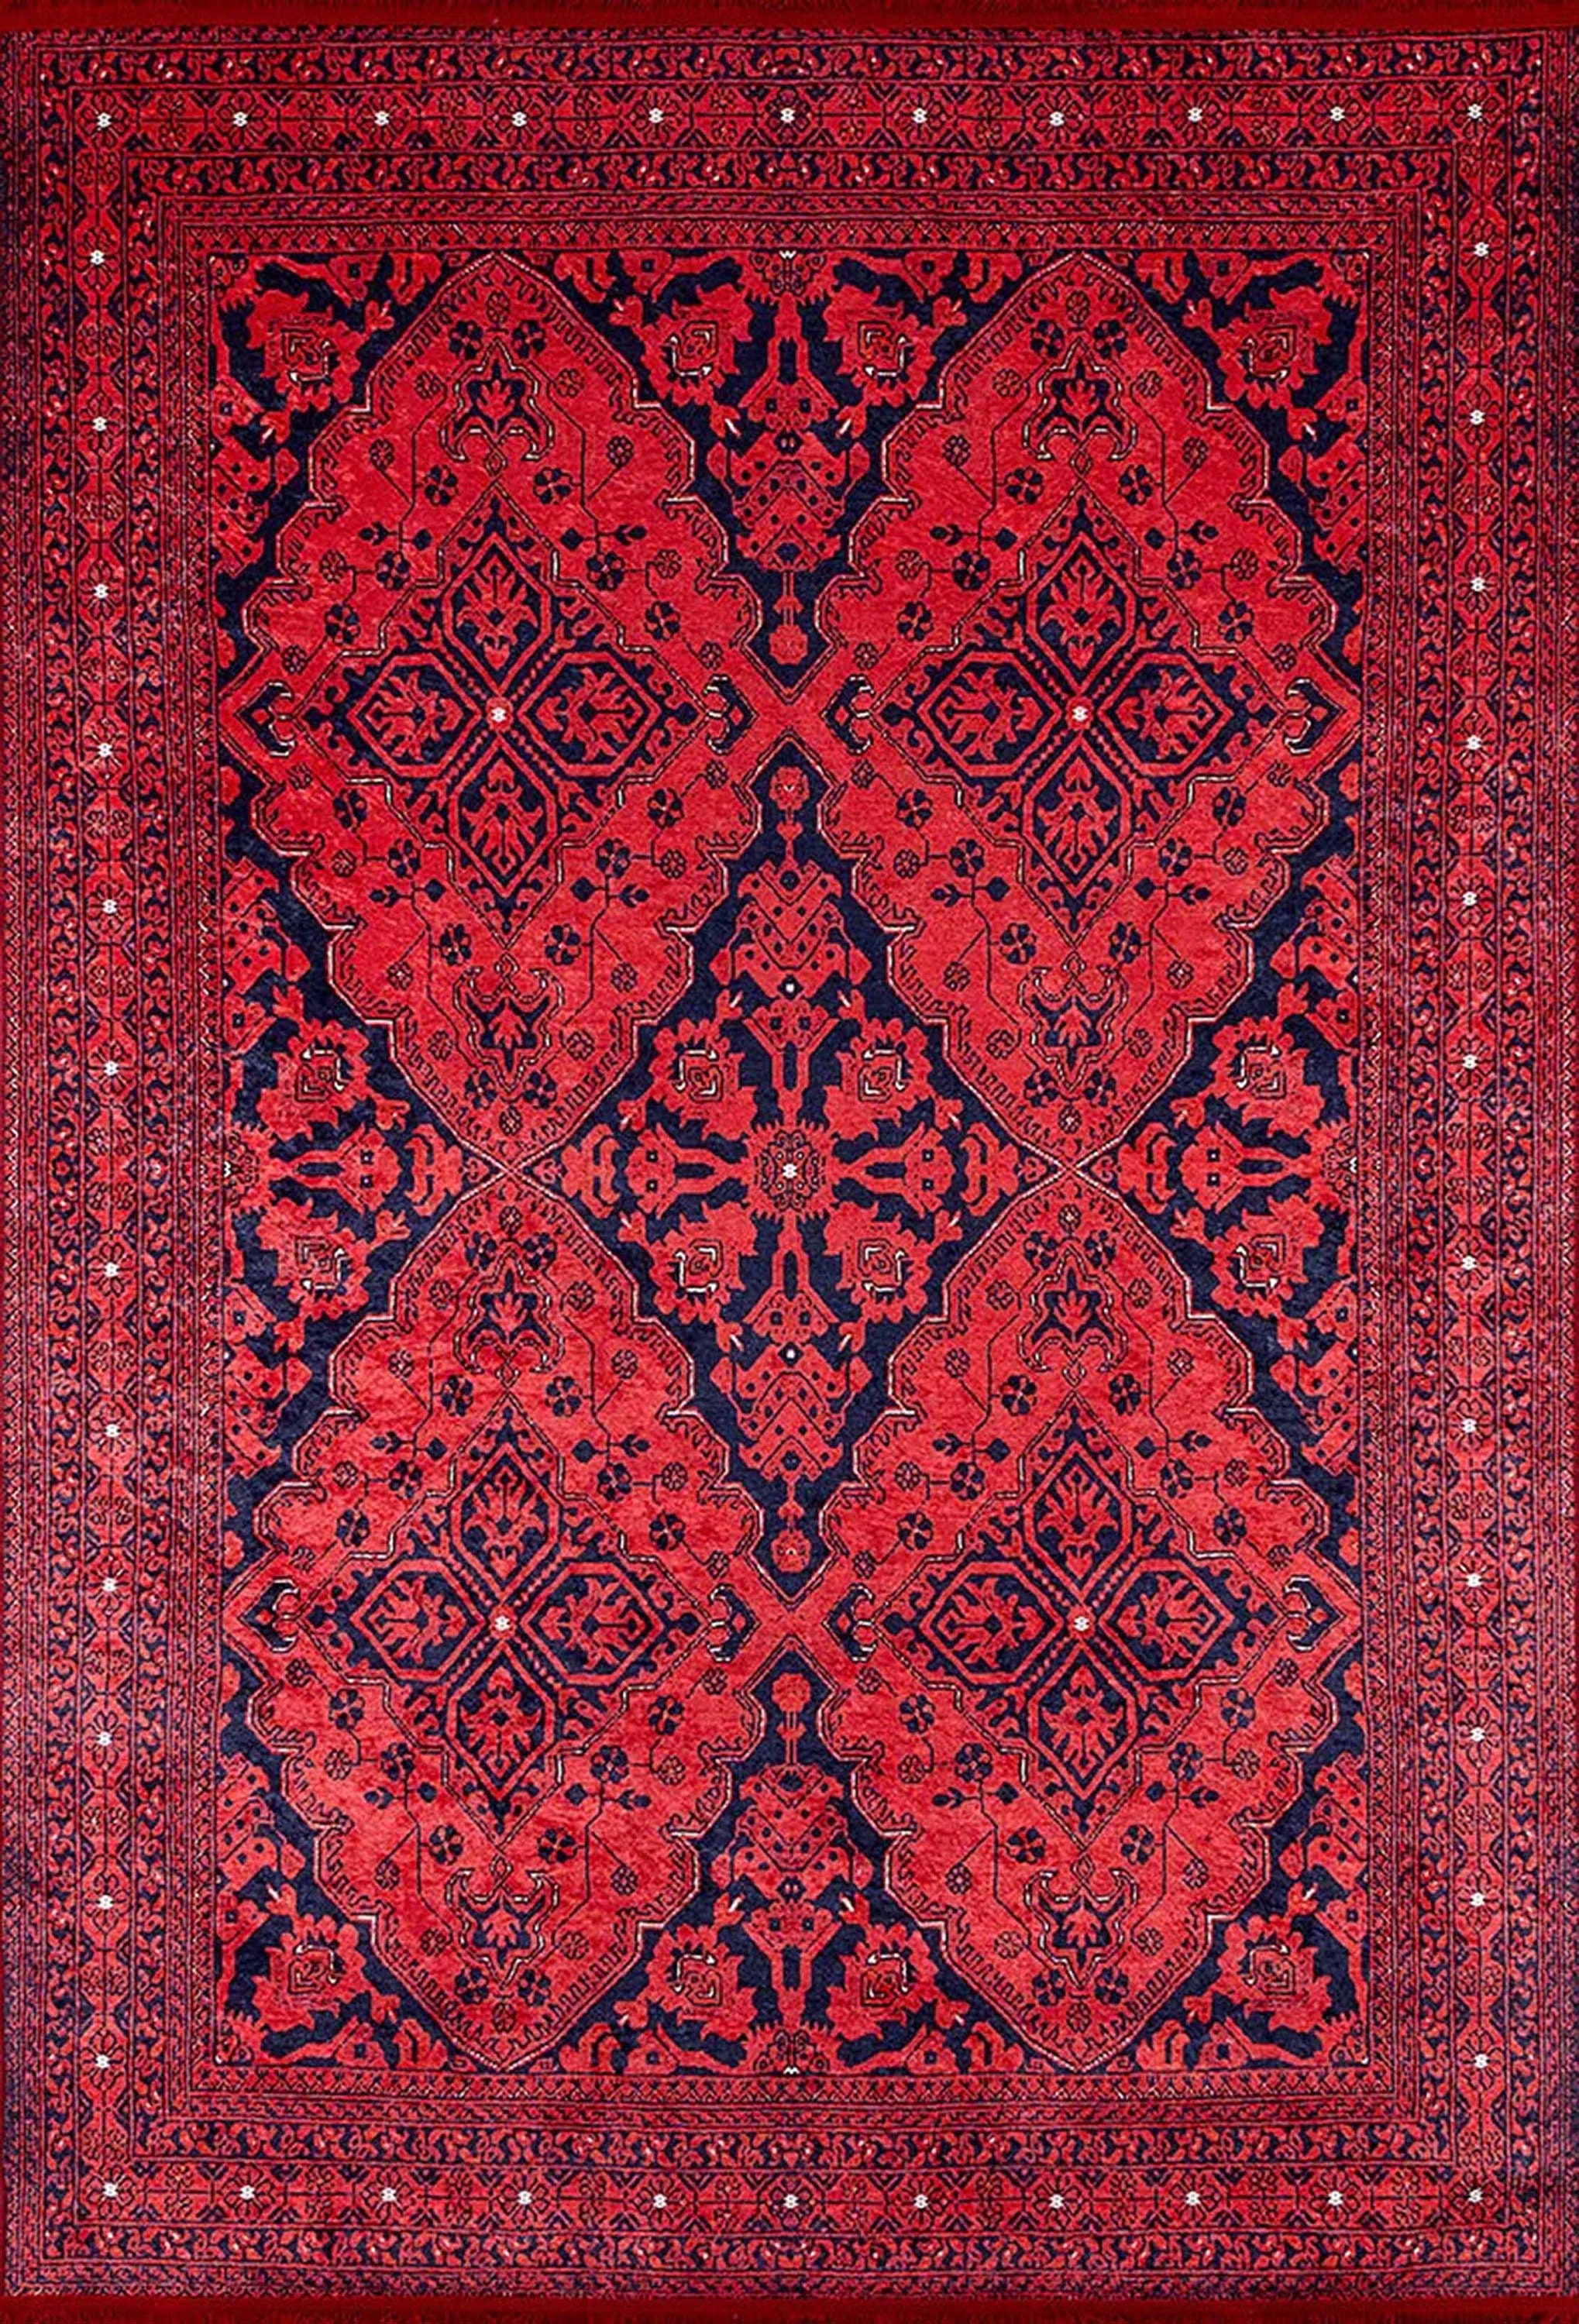 2x3 Red Afghan Rug, Small Area Rugs 3x5 4x6 Oriental Traditional Antique  Vintage Rugs for Kitchen Bathroom Bedside Bedroom Entryway Laundry 